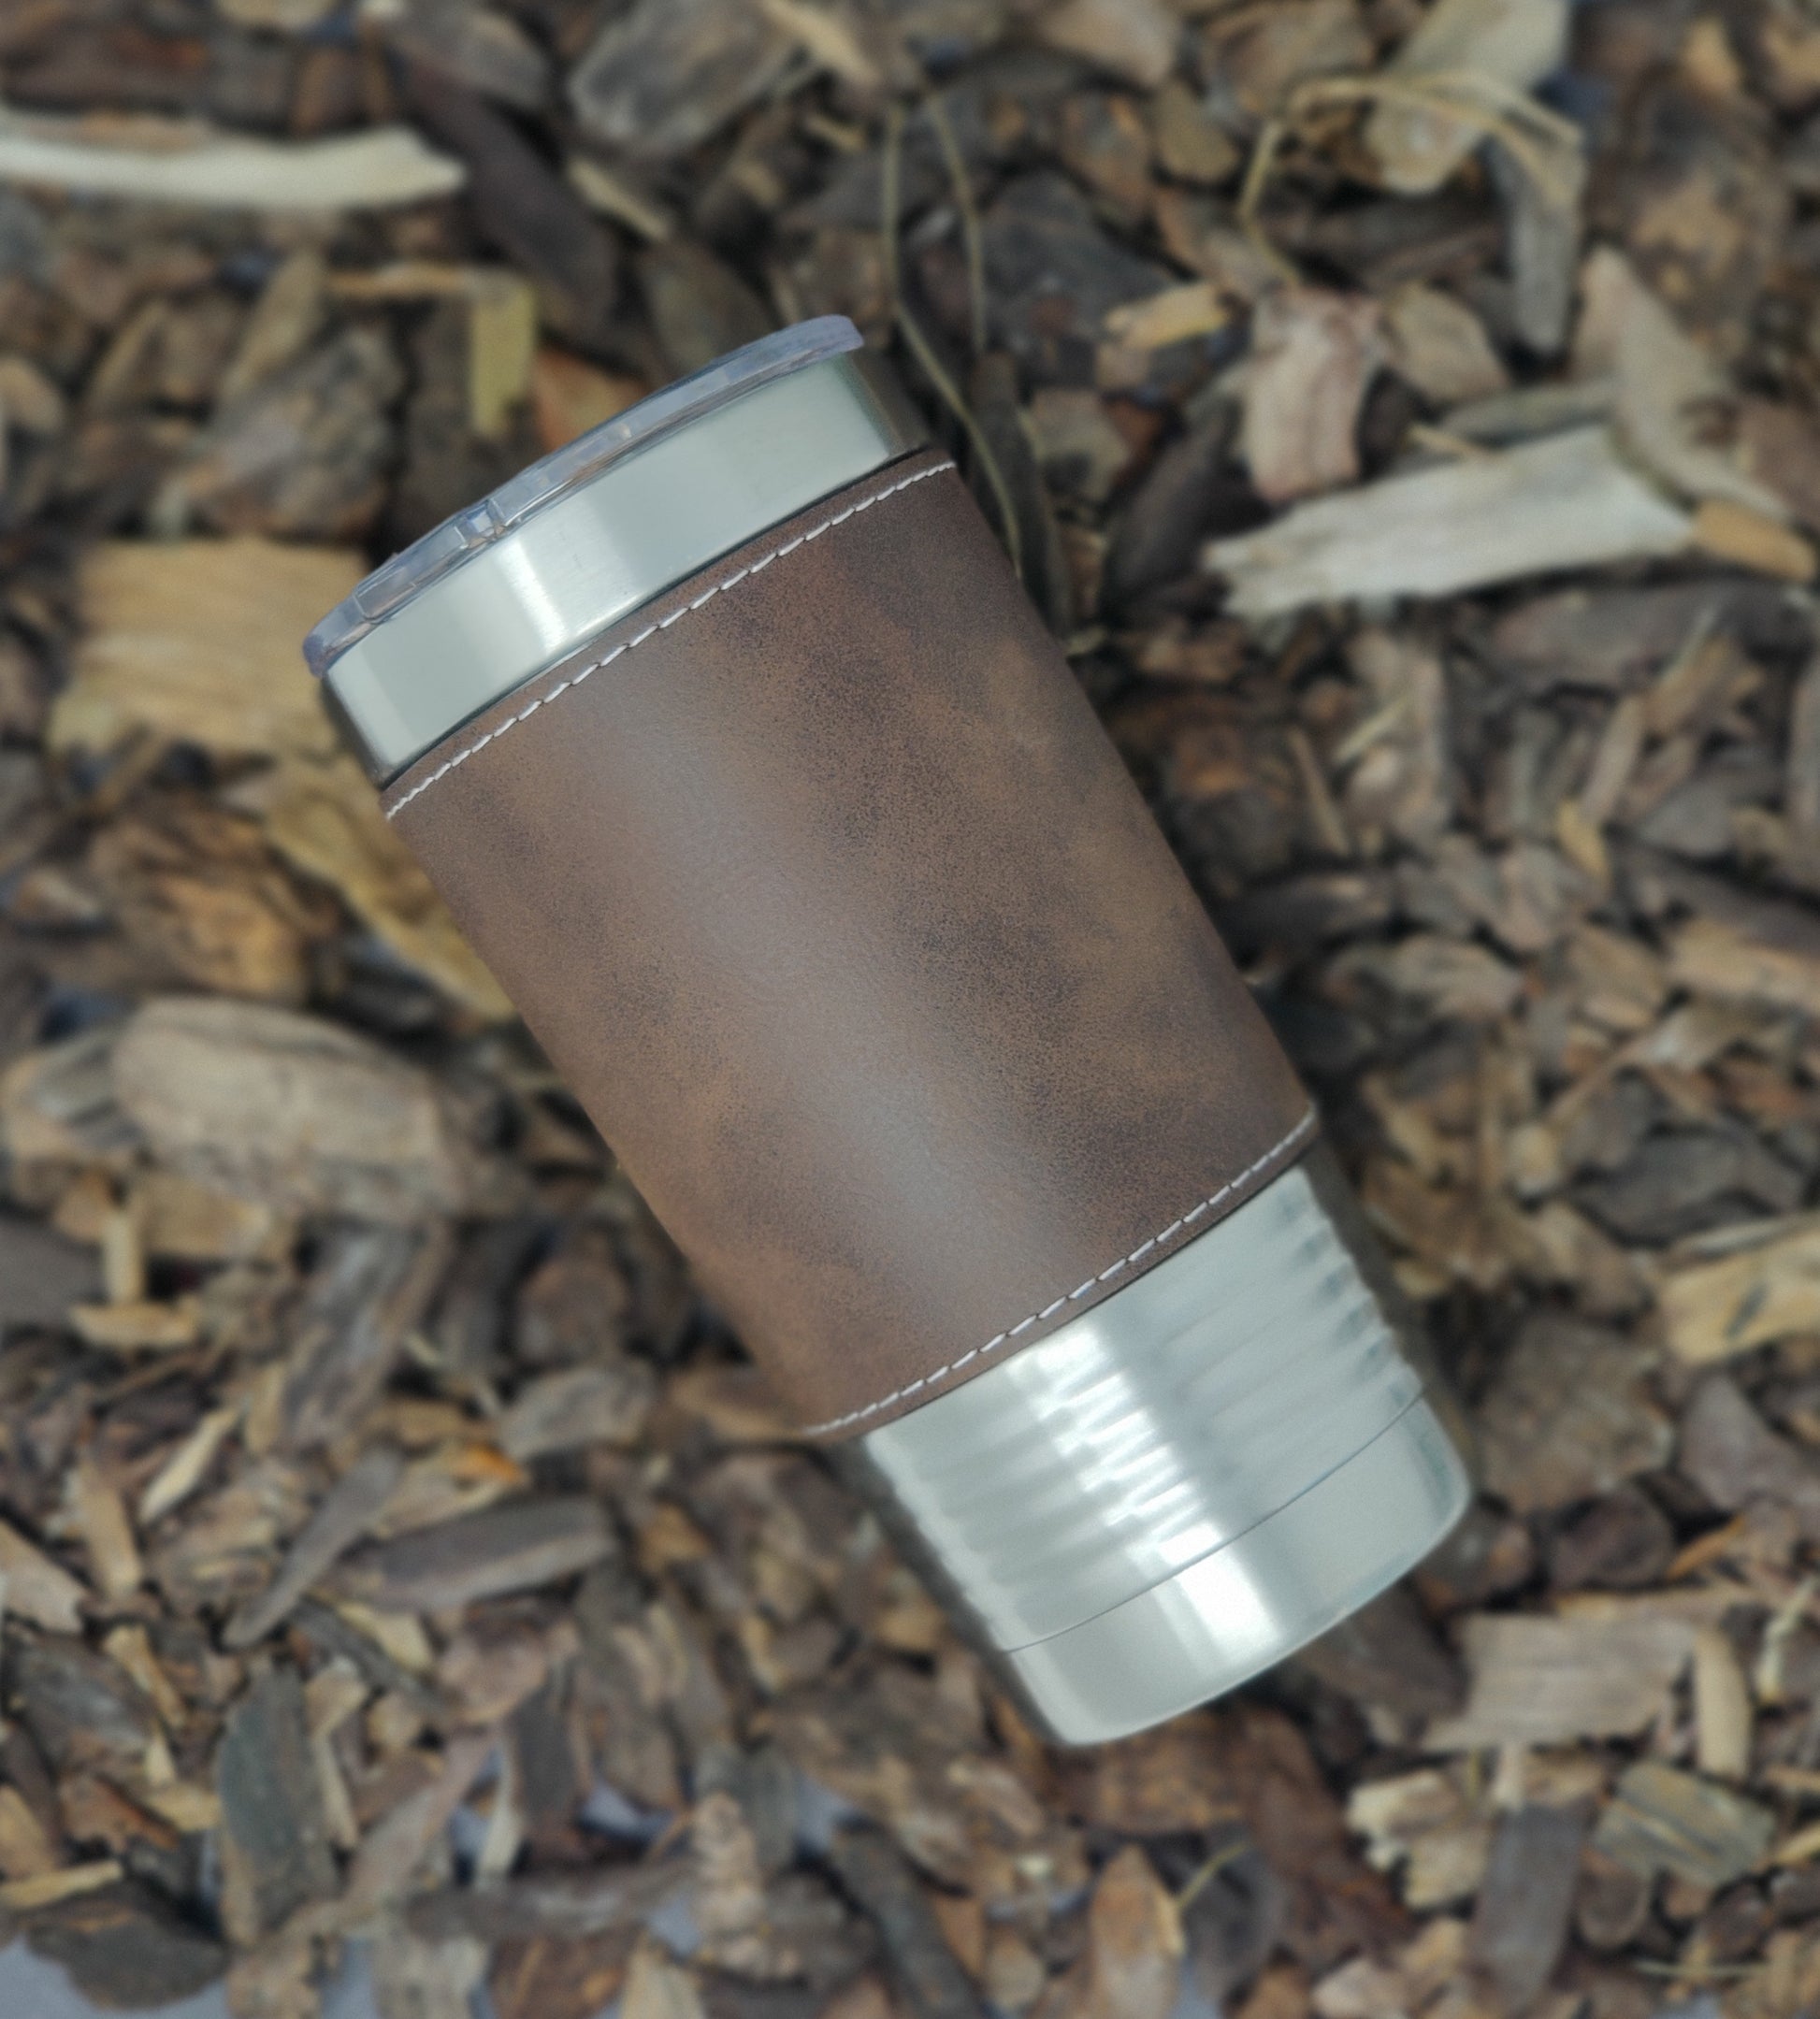 Leather Wrapped Stainless Steel Insulated Tumbler 20oz